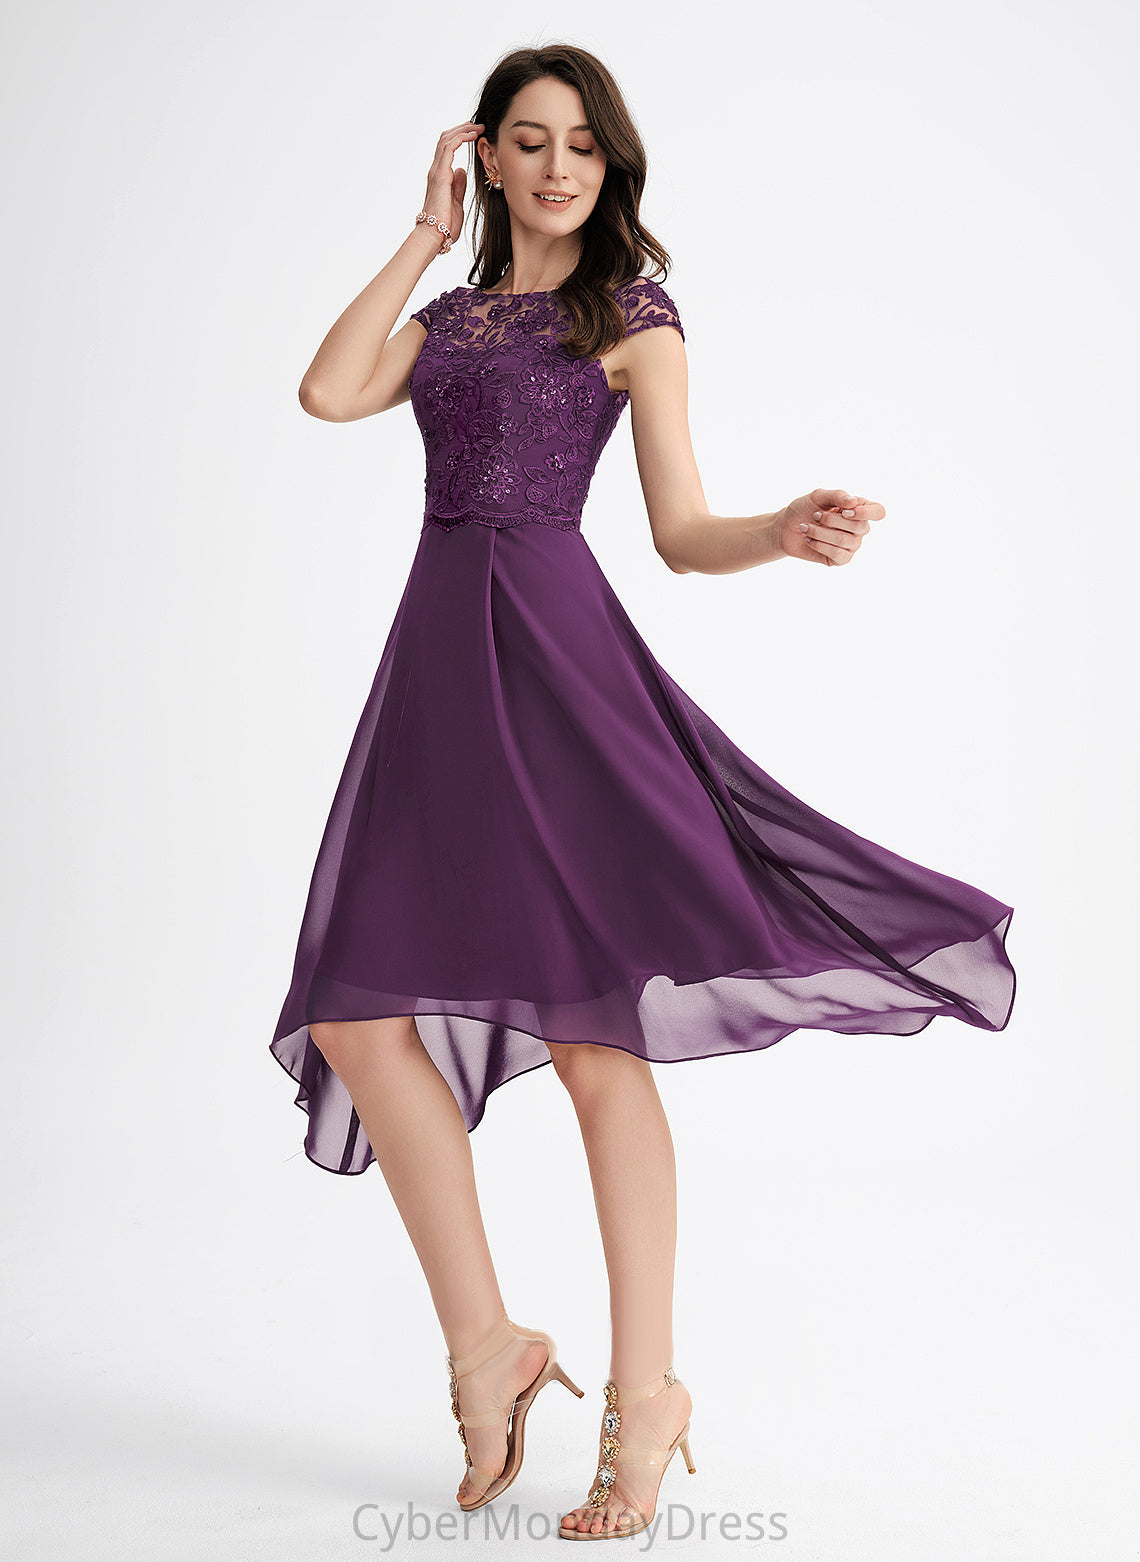 Beading Sequins Cocktail Dresses Chiffon Scoop Cocktail Lace Neck Mareli Dress A-Line Asymmetrical With